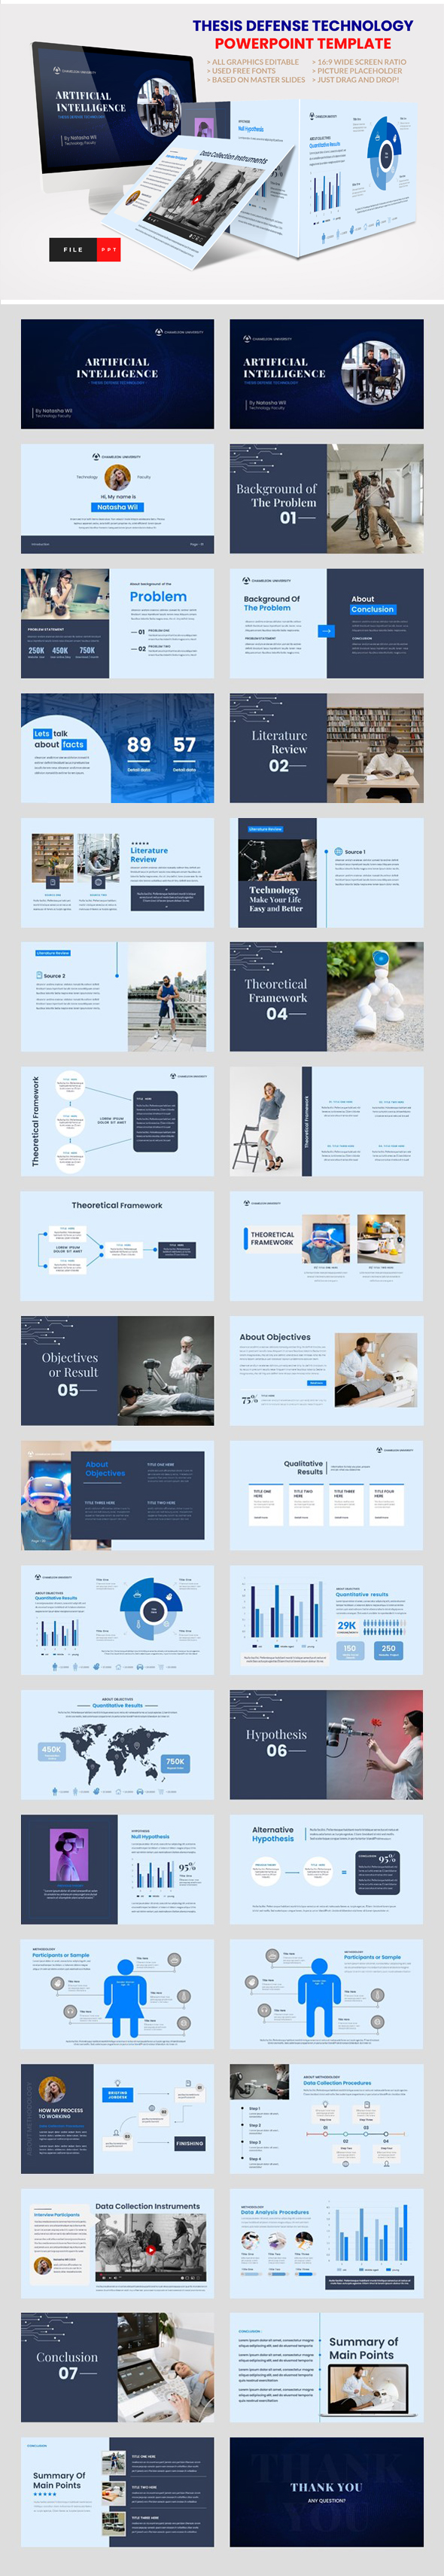 Thesis Defense Technology Power Point Template